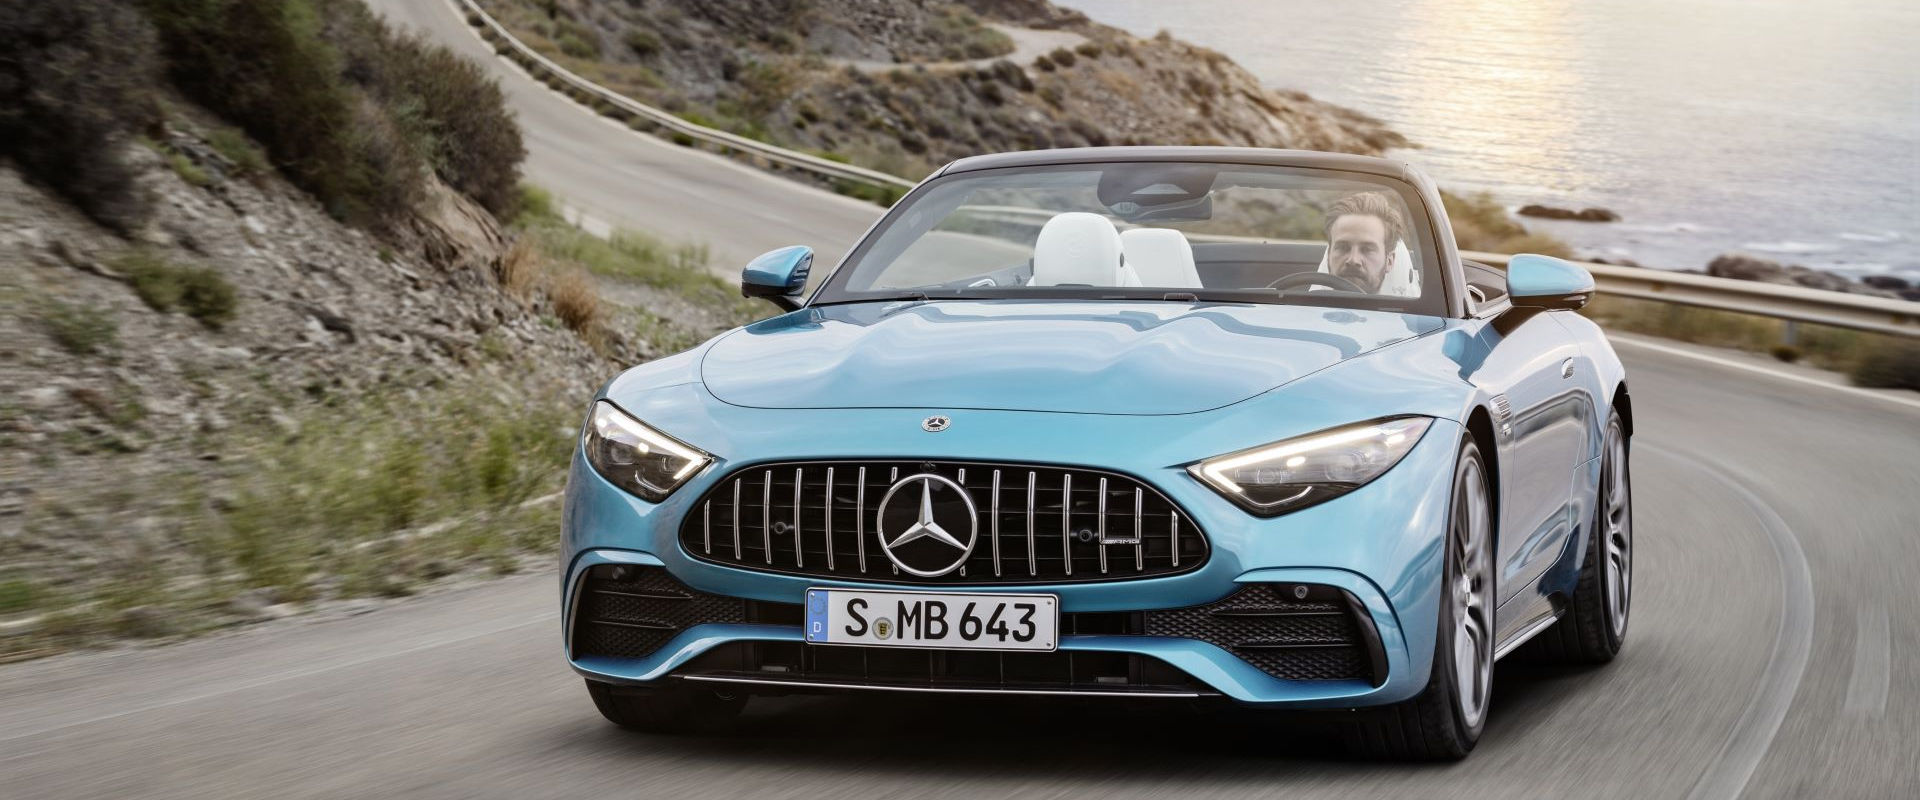 The Mercedes-AMG SL 43 is Coming to America